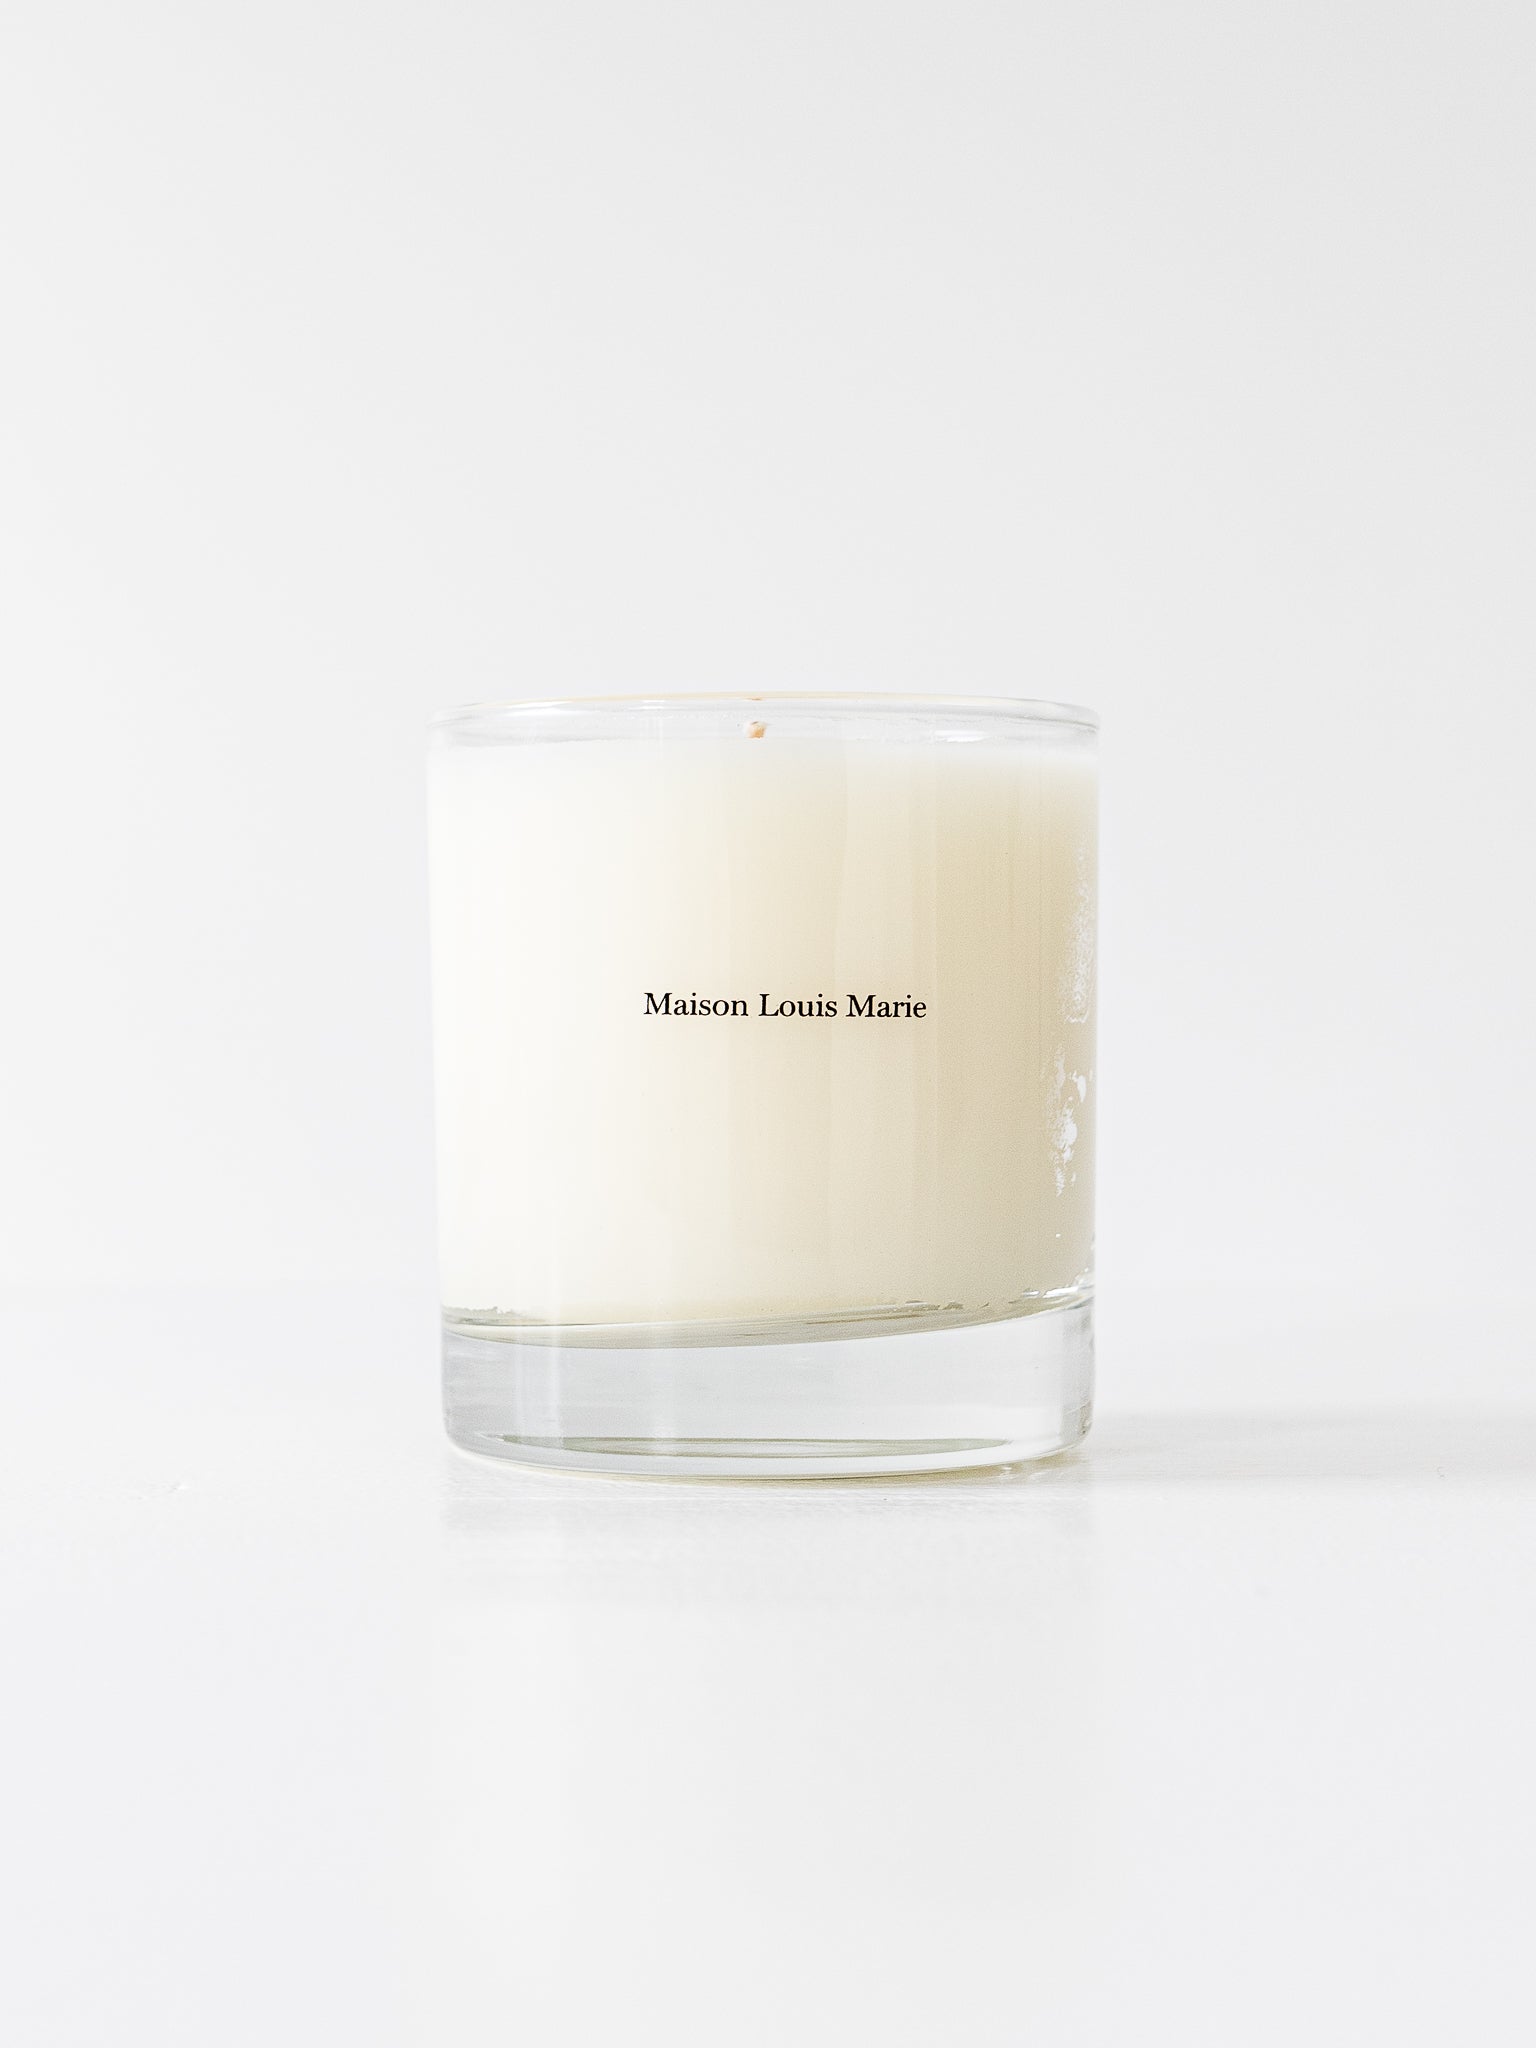 Maison Louis Marie no. 12 Bousval Candle - Worthwhile